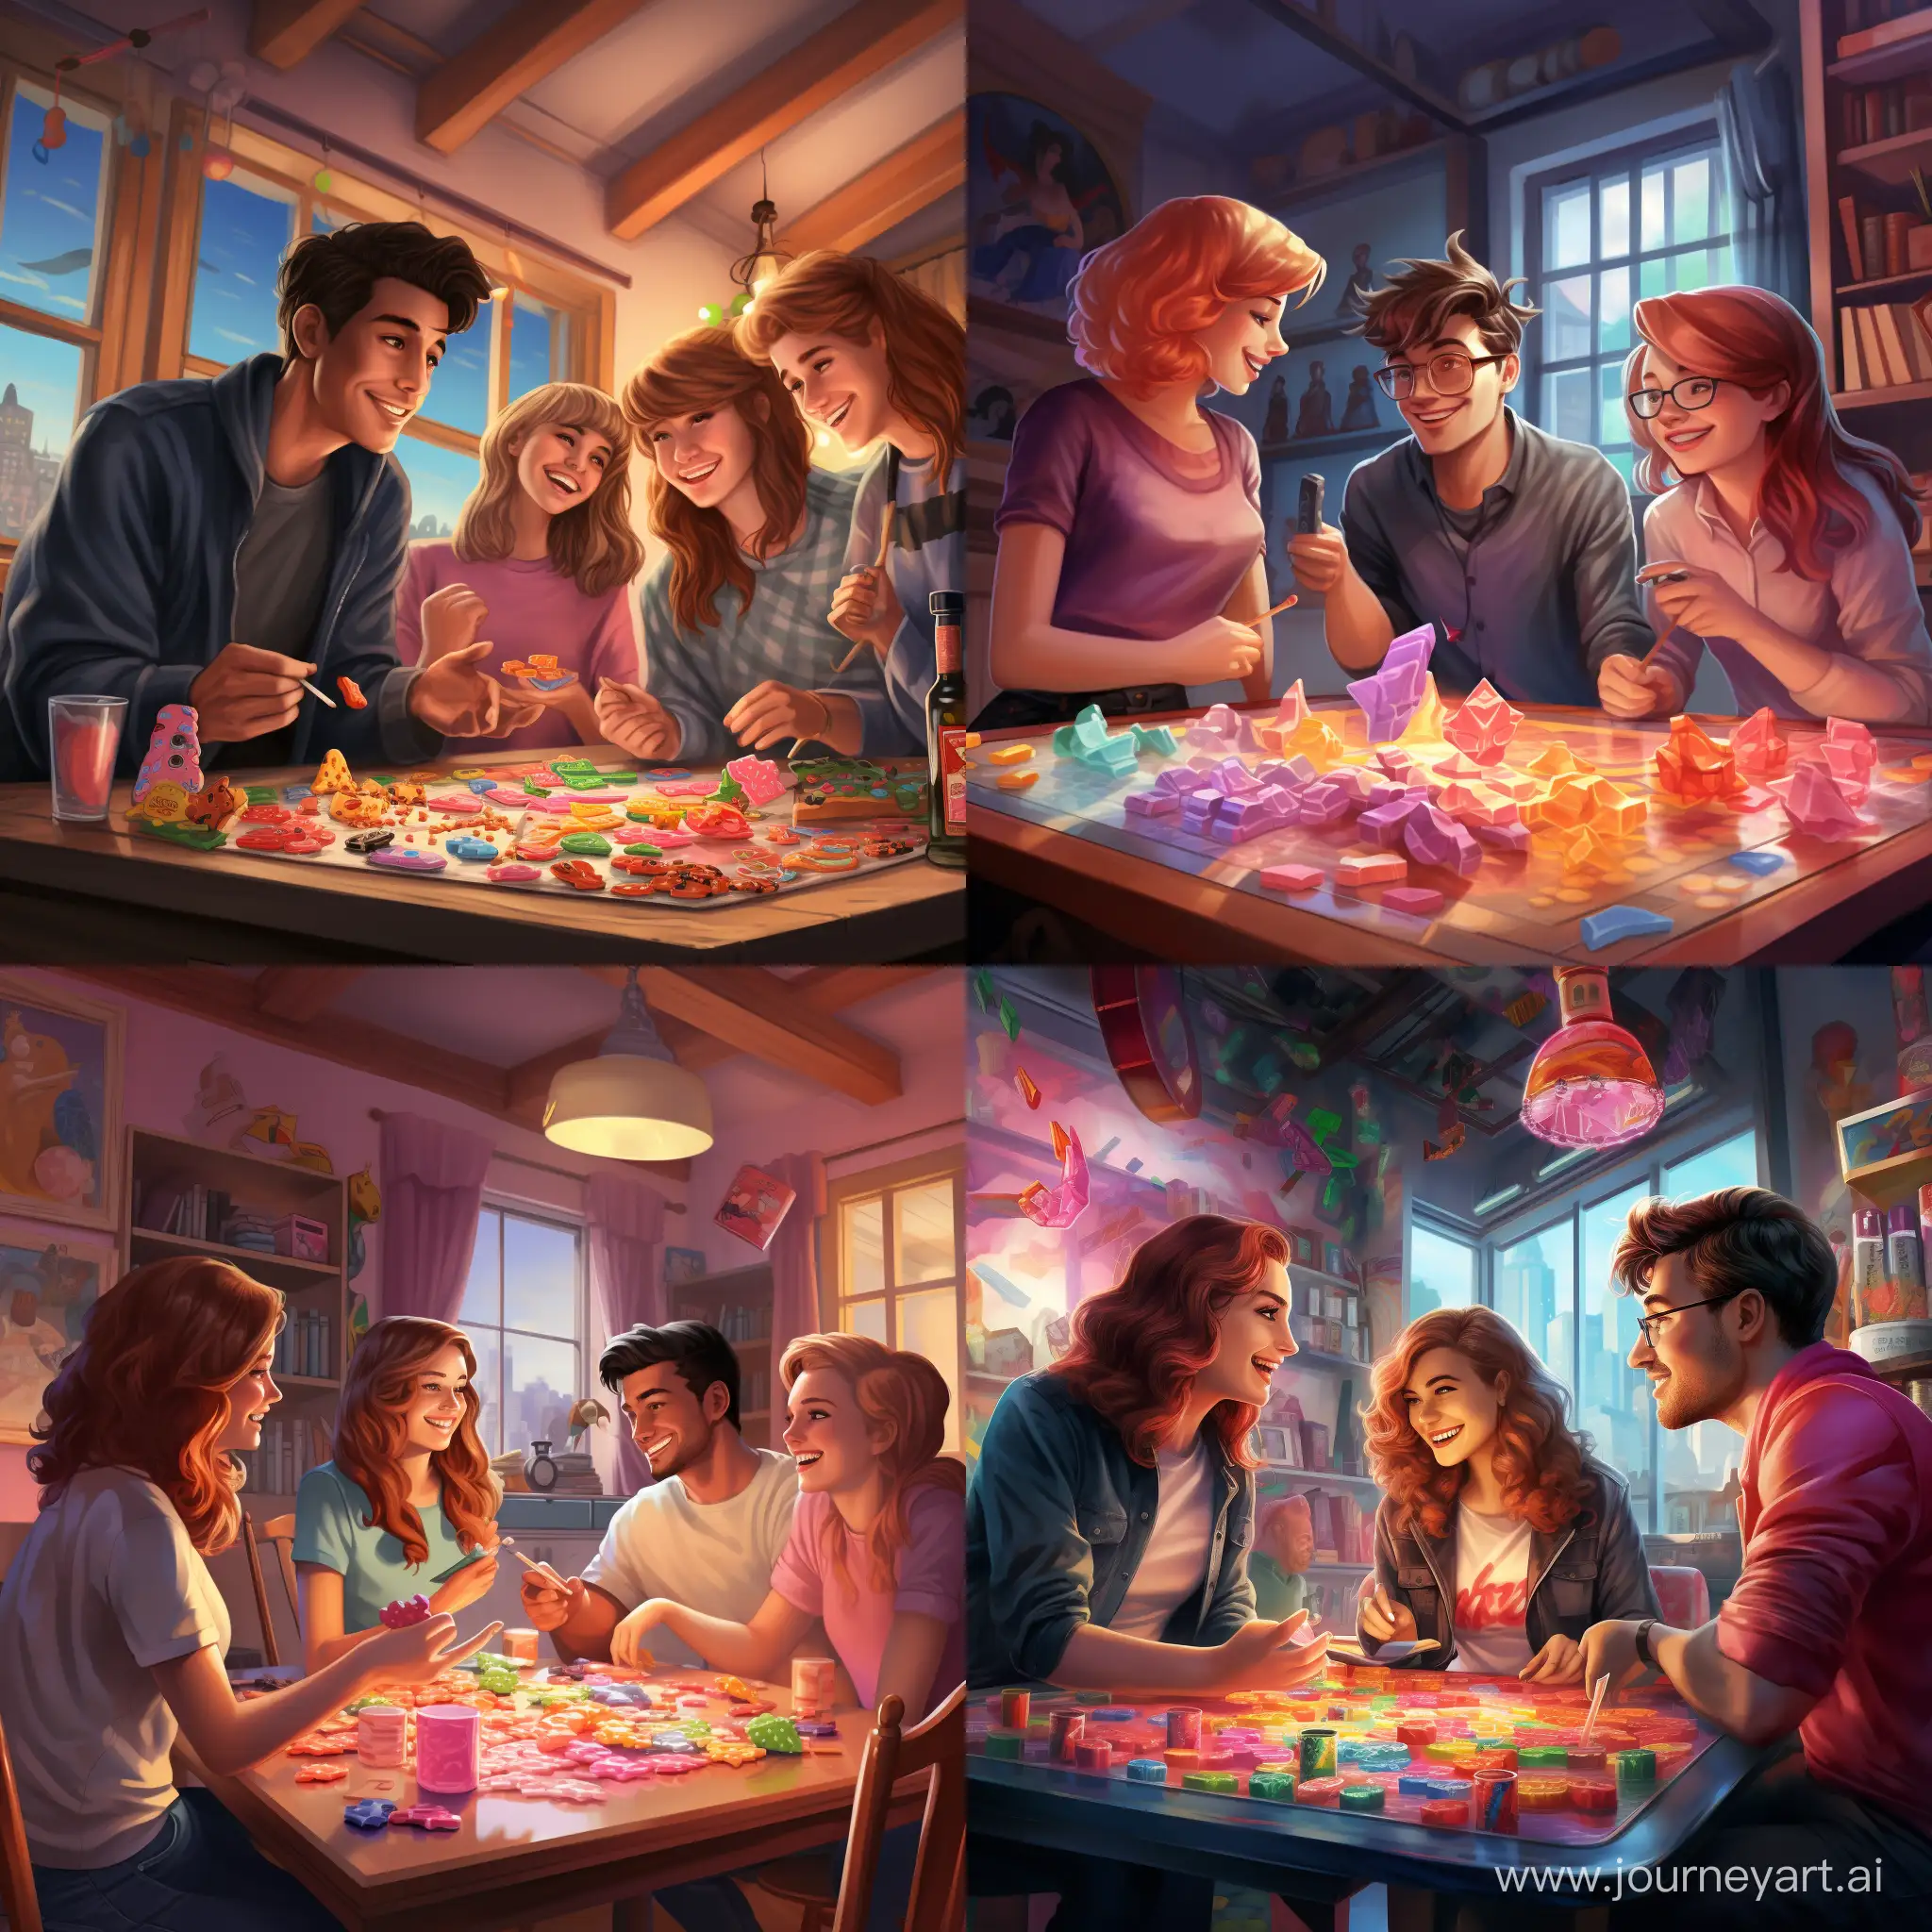 4 persons playing board games and eating gummies, scandy style interior in background